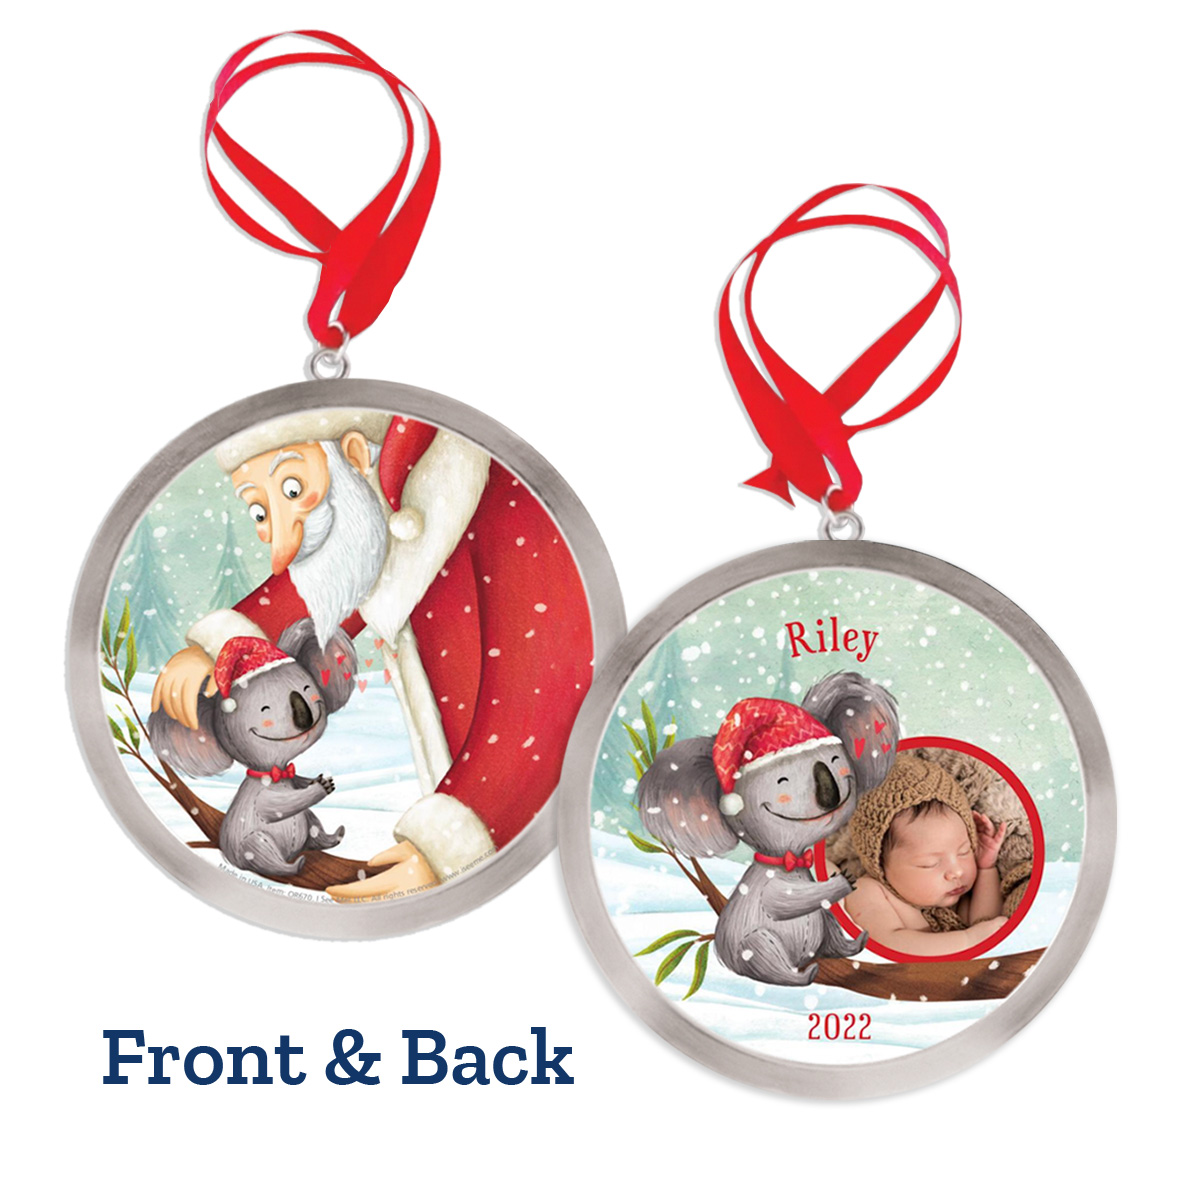 My Very Own Christmas Personalized Book and Ornament Gift Set